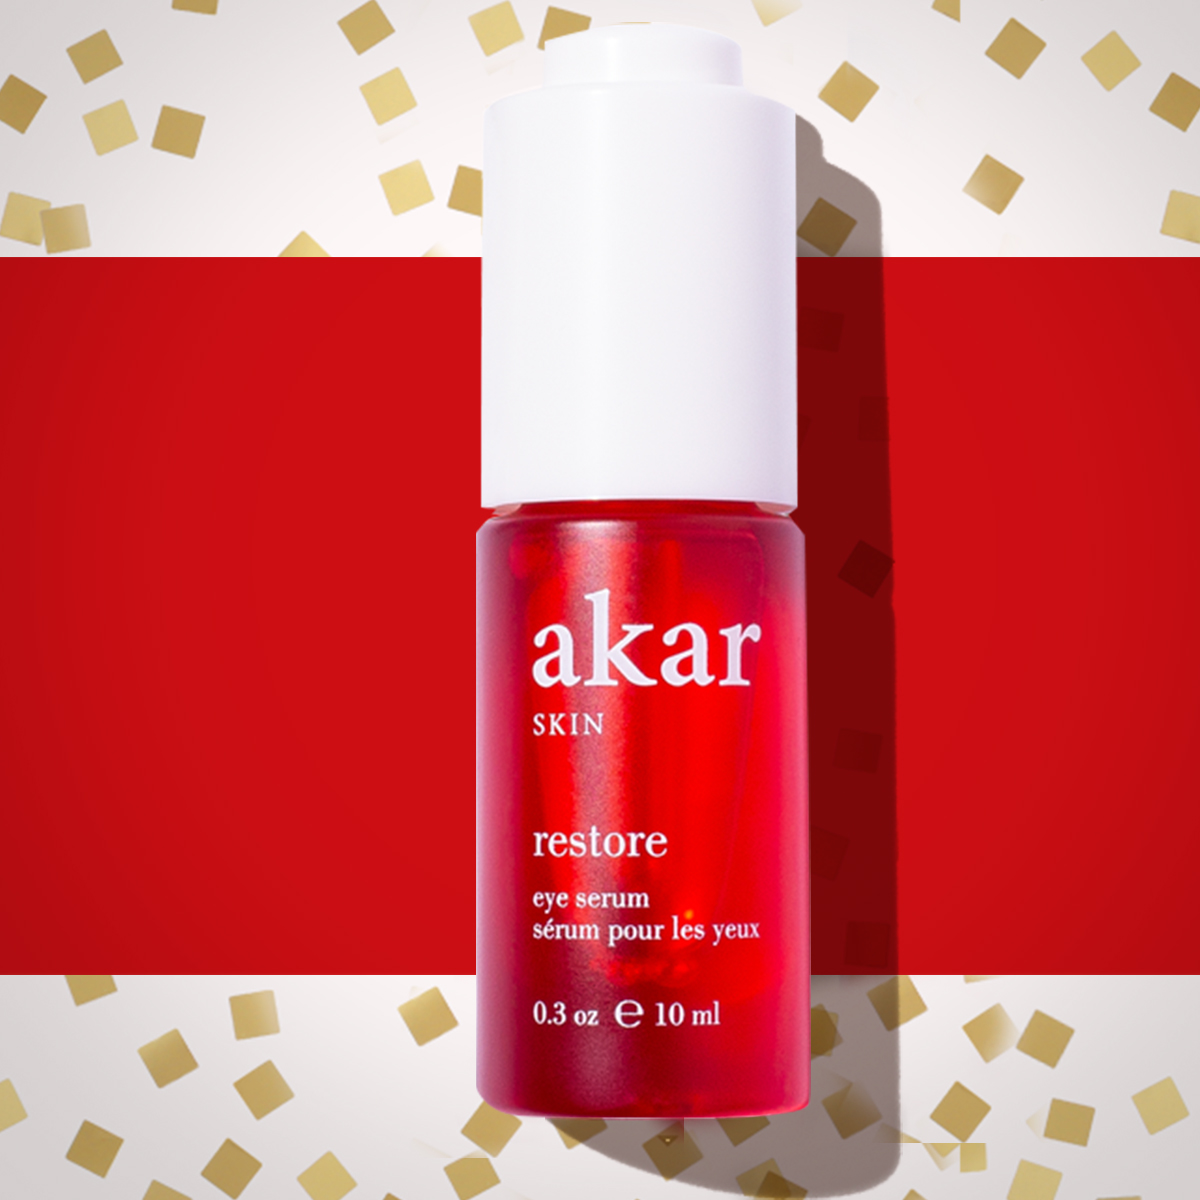 Allure Beauty Box Deal: Get a Free Akar Restore Eye Serum With Purchase